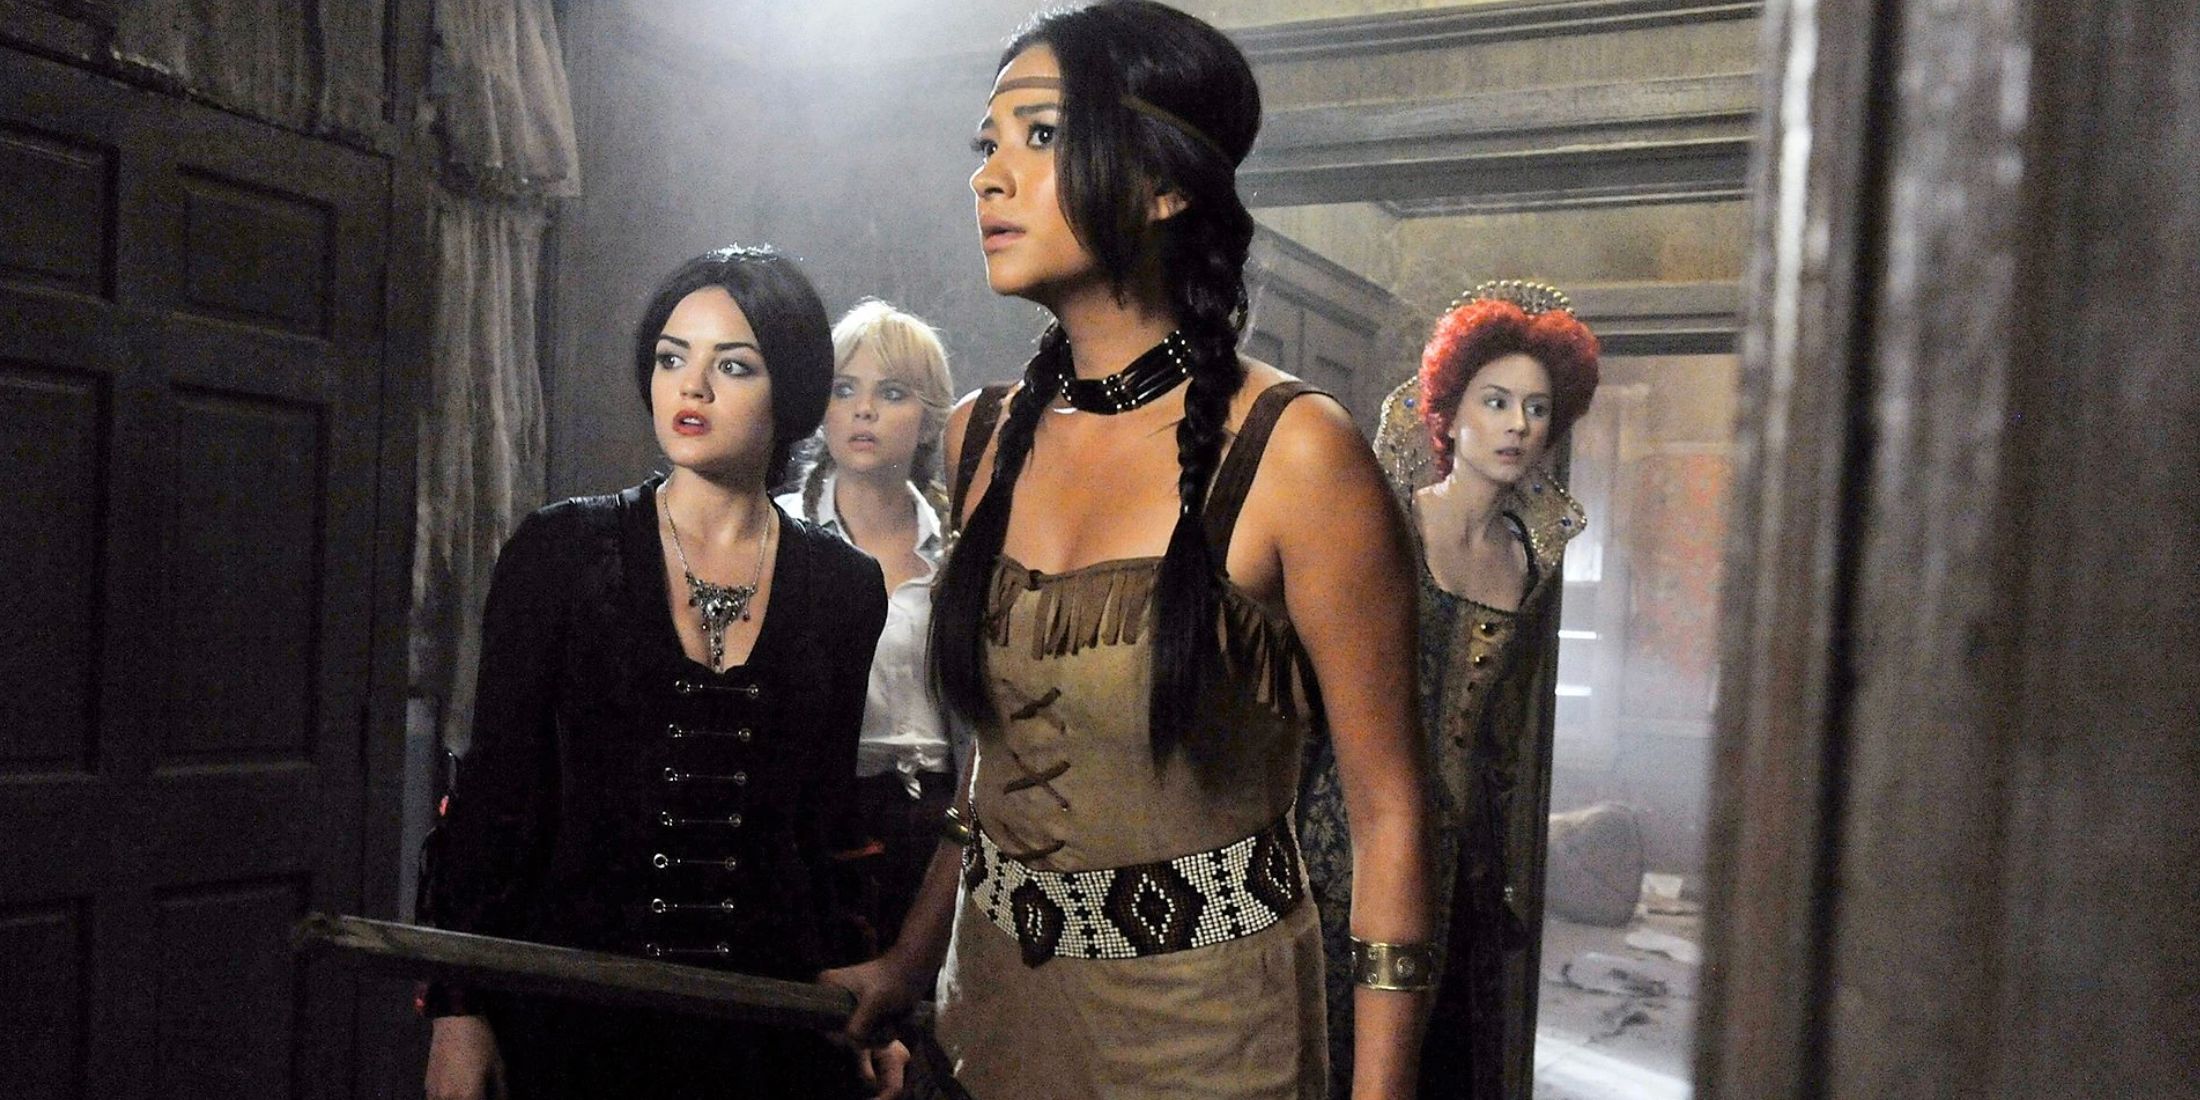 The Liars in Halloween costumes in Pretty Little Liars episode The First Secret